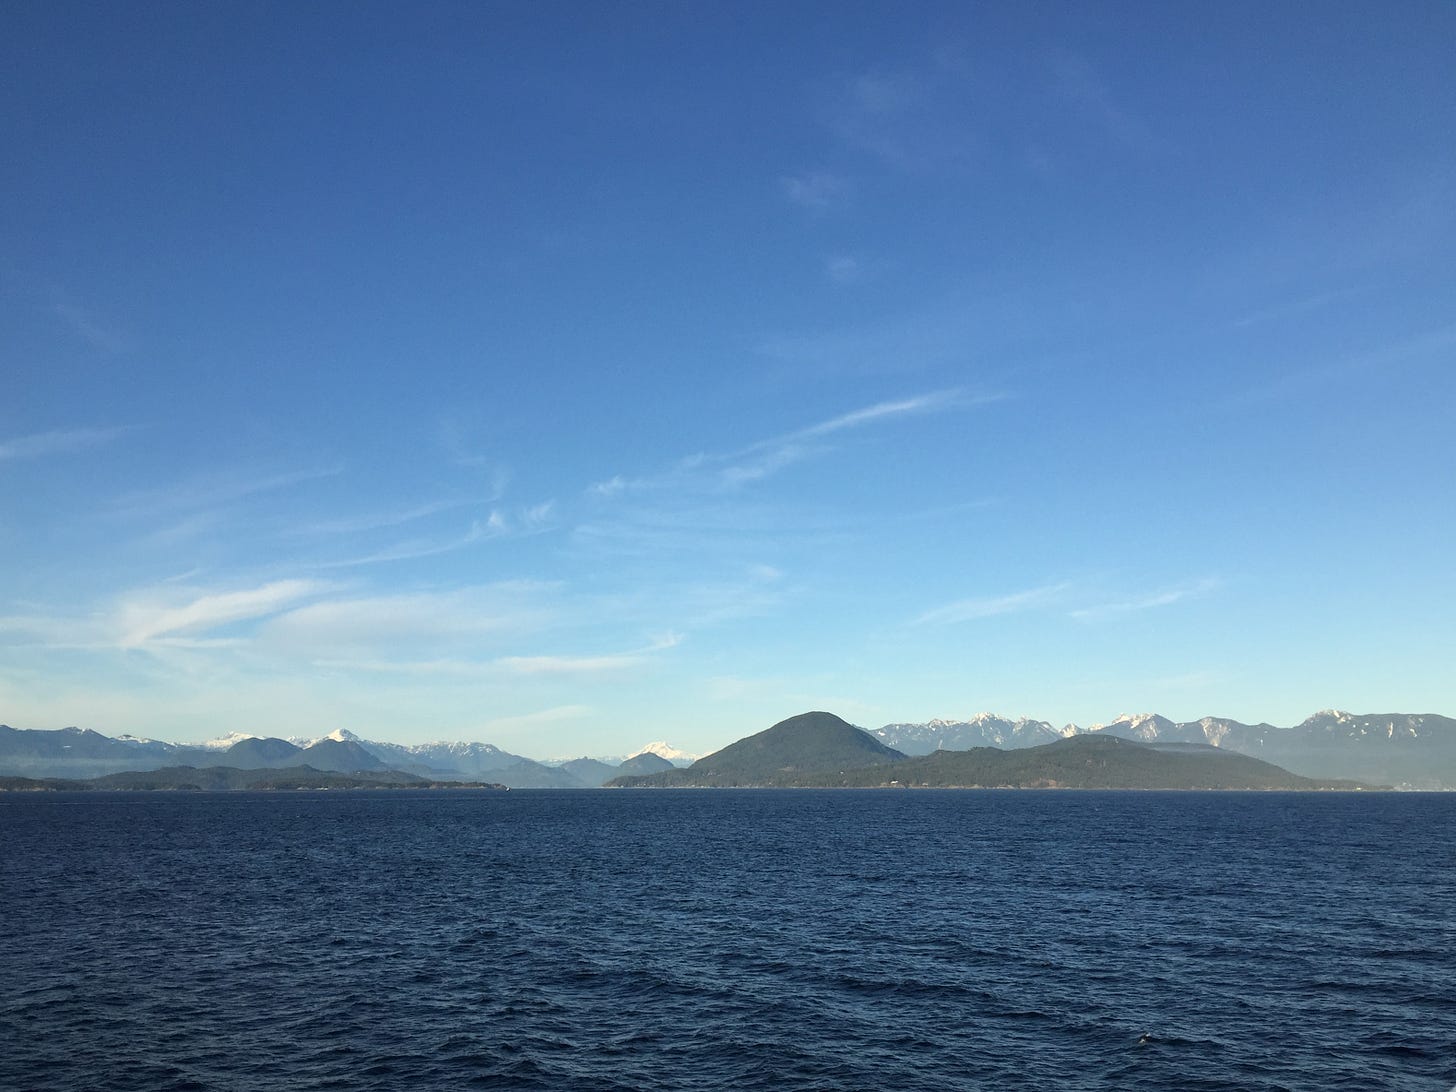 A view of the ocean and mountains taken from the ferry. The sky is blue with wisps of cloud and the ocean is dark blue with small waves.